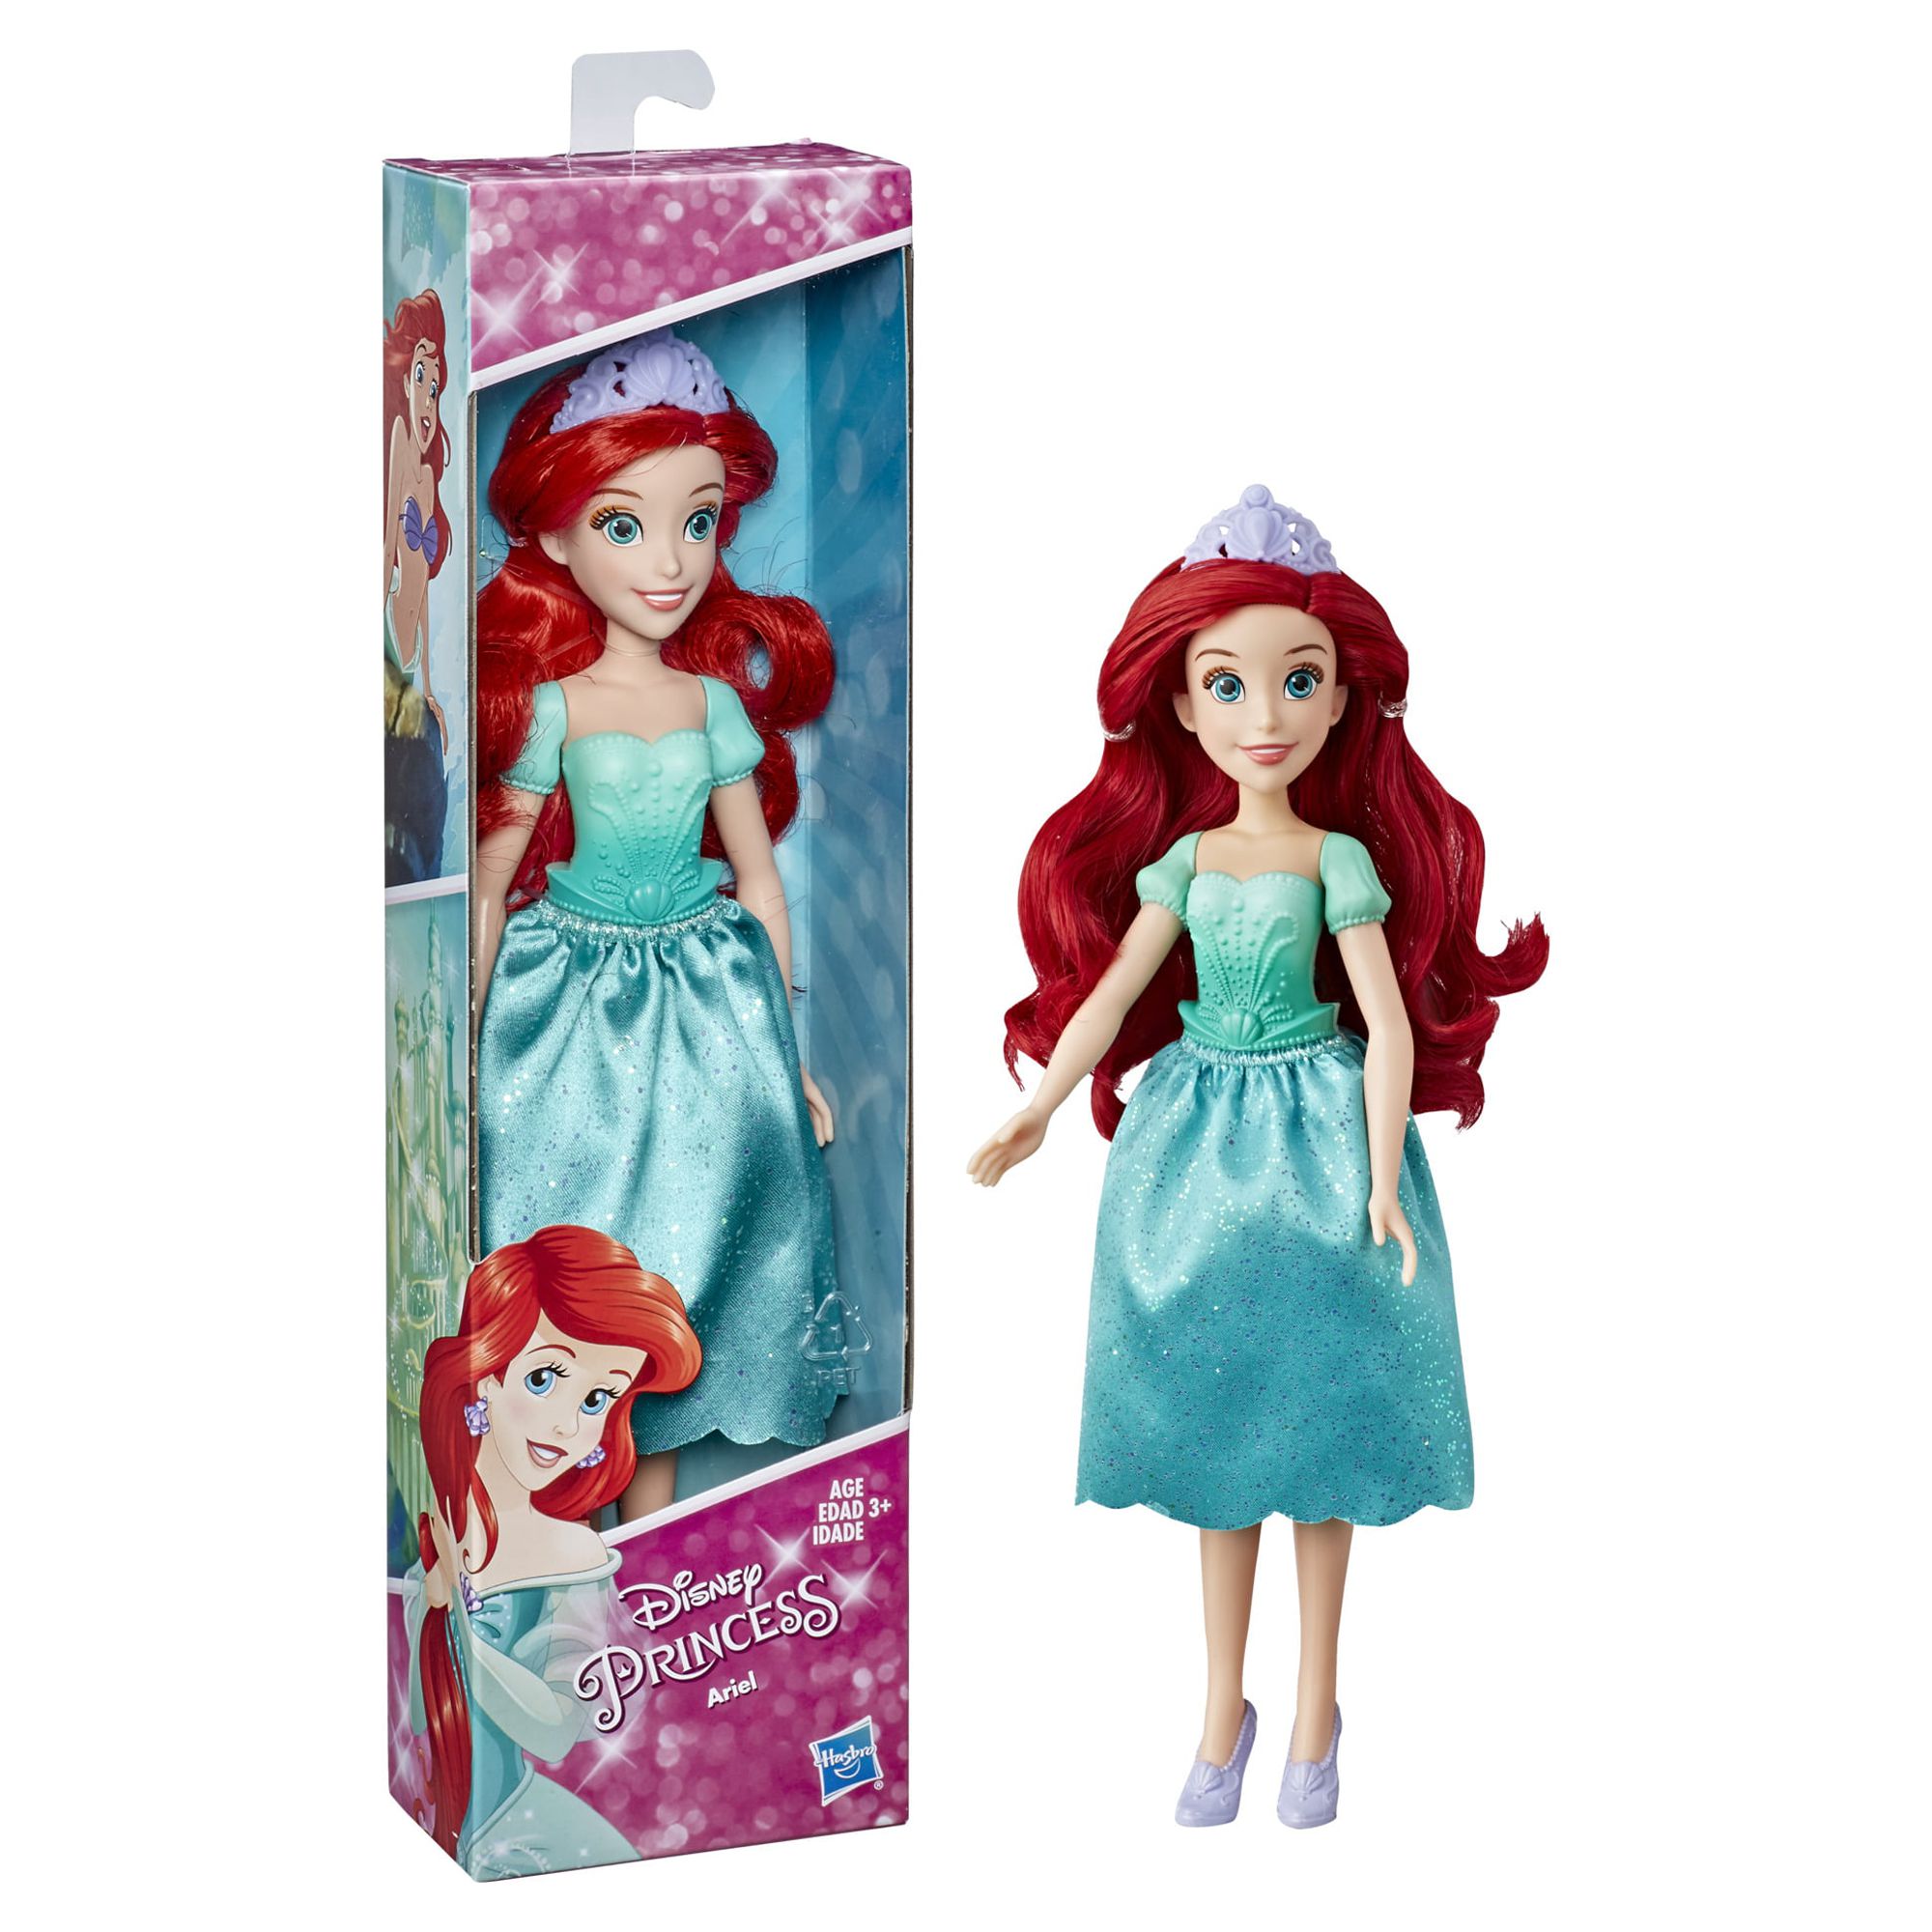 Disney Princess Ariel Fashion Doll, for Kids Ages 3 and Up - image 3 of 4